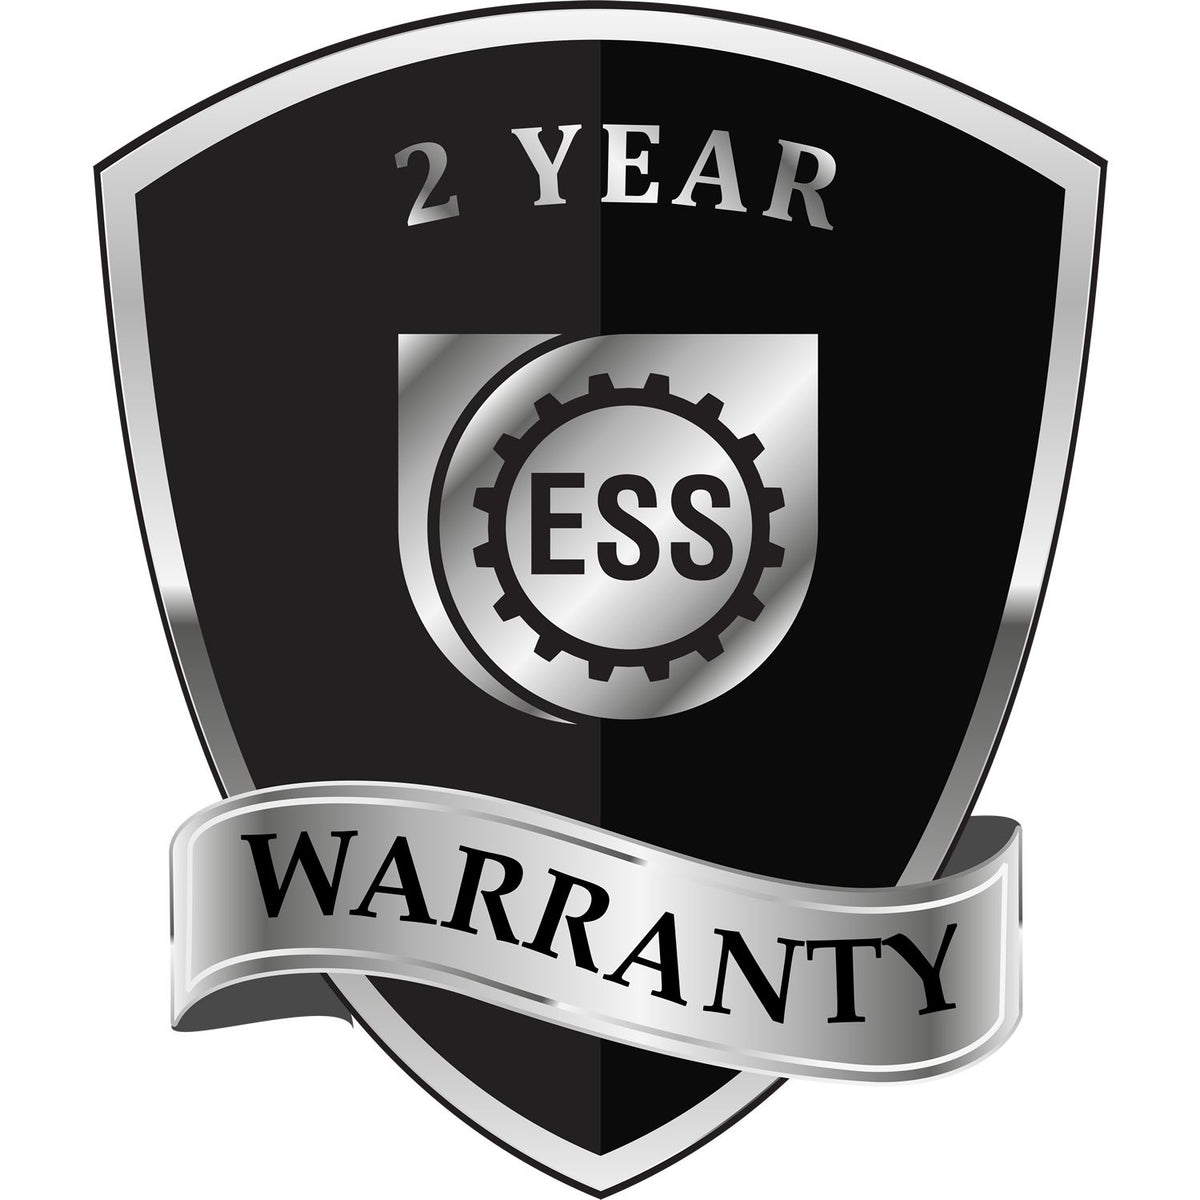 A black and silver badge or emblem showing warranty information for the Heavy Duty Cast Iron Delaware Geologist Seal Embosser